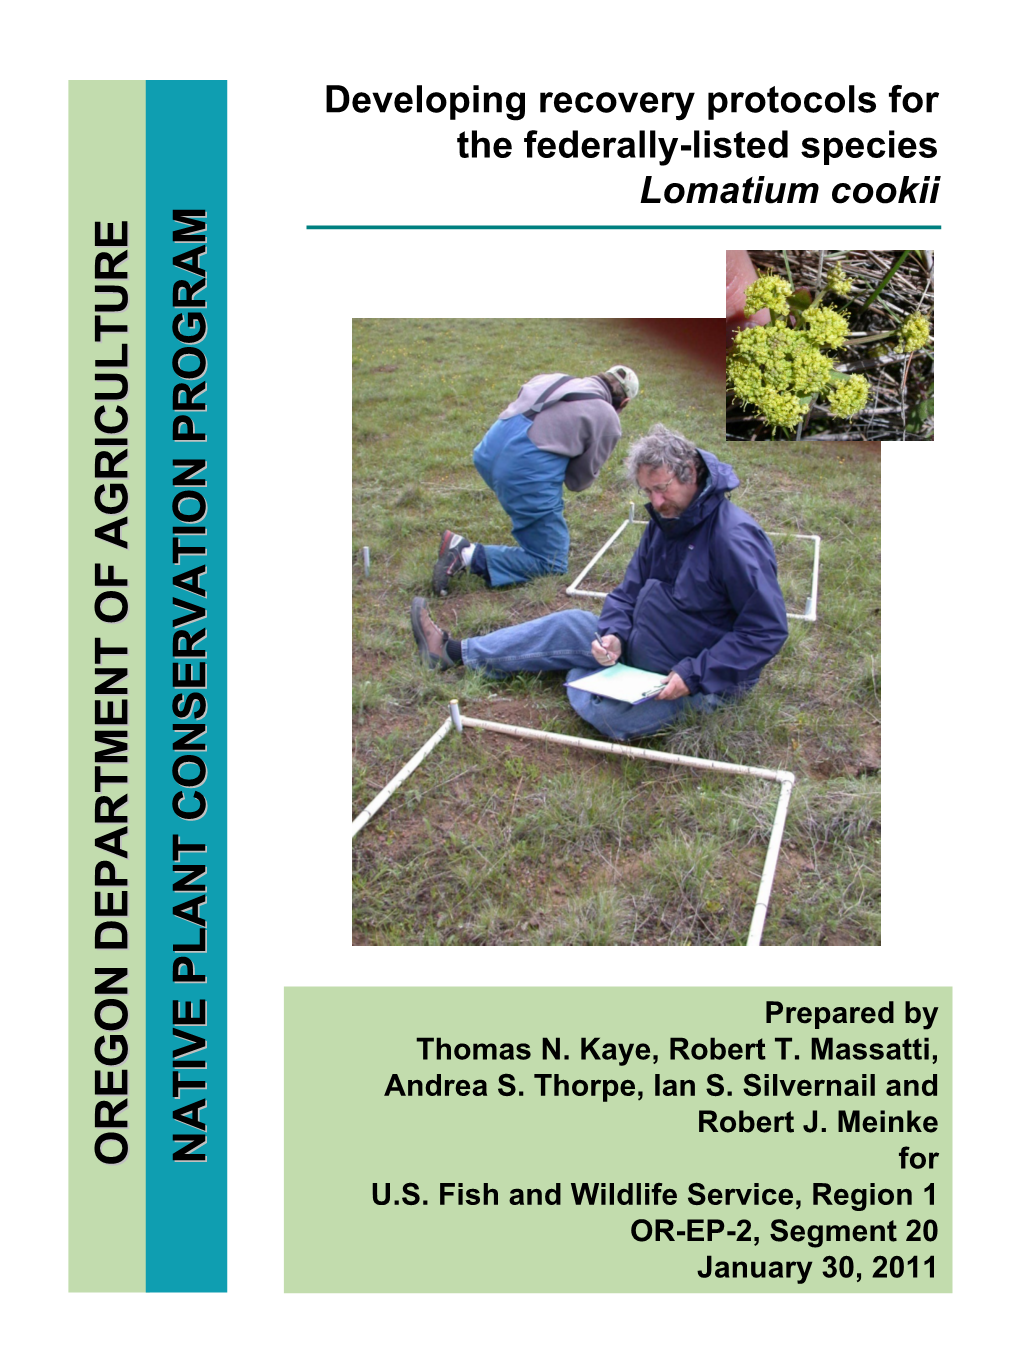 Cook's Lomatium Recovery Protocols